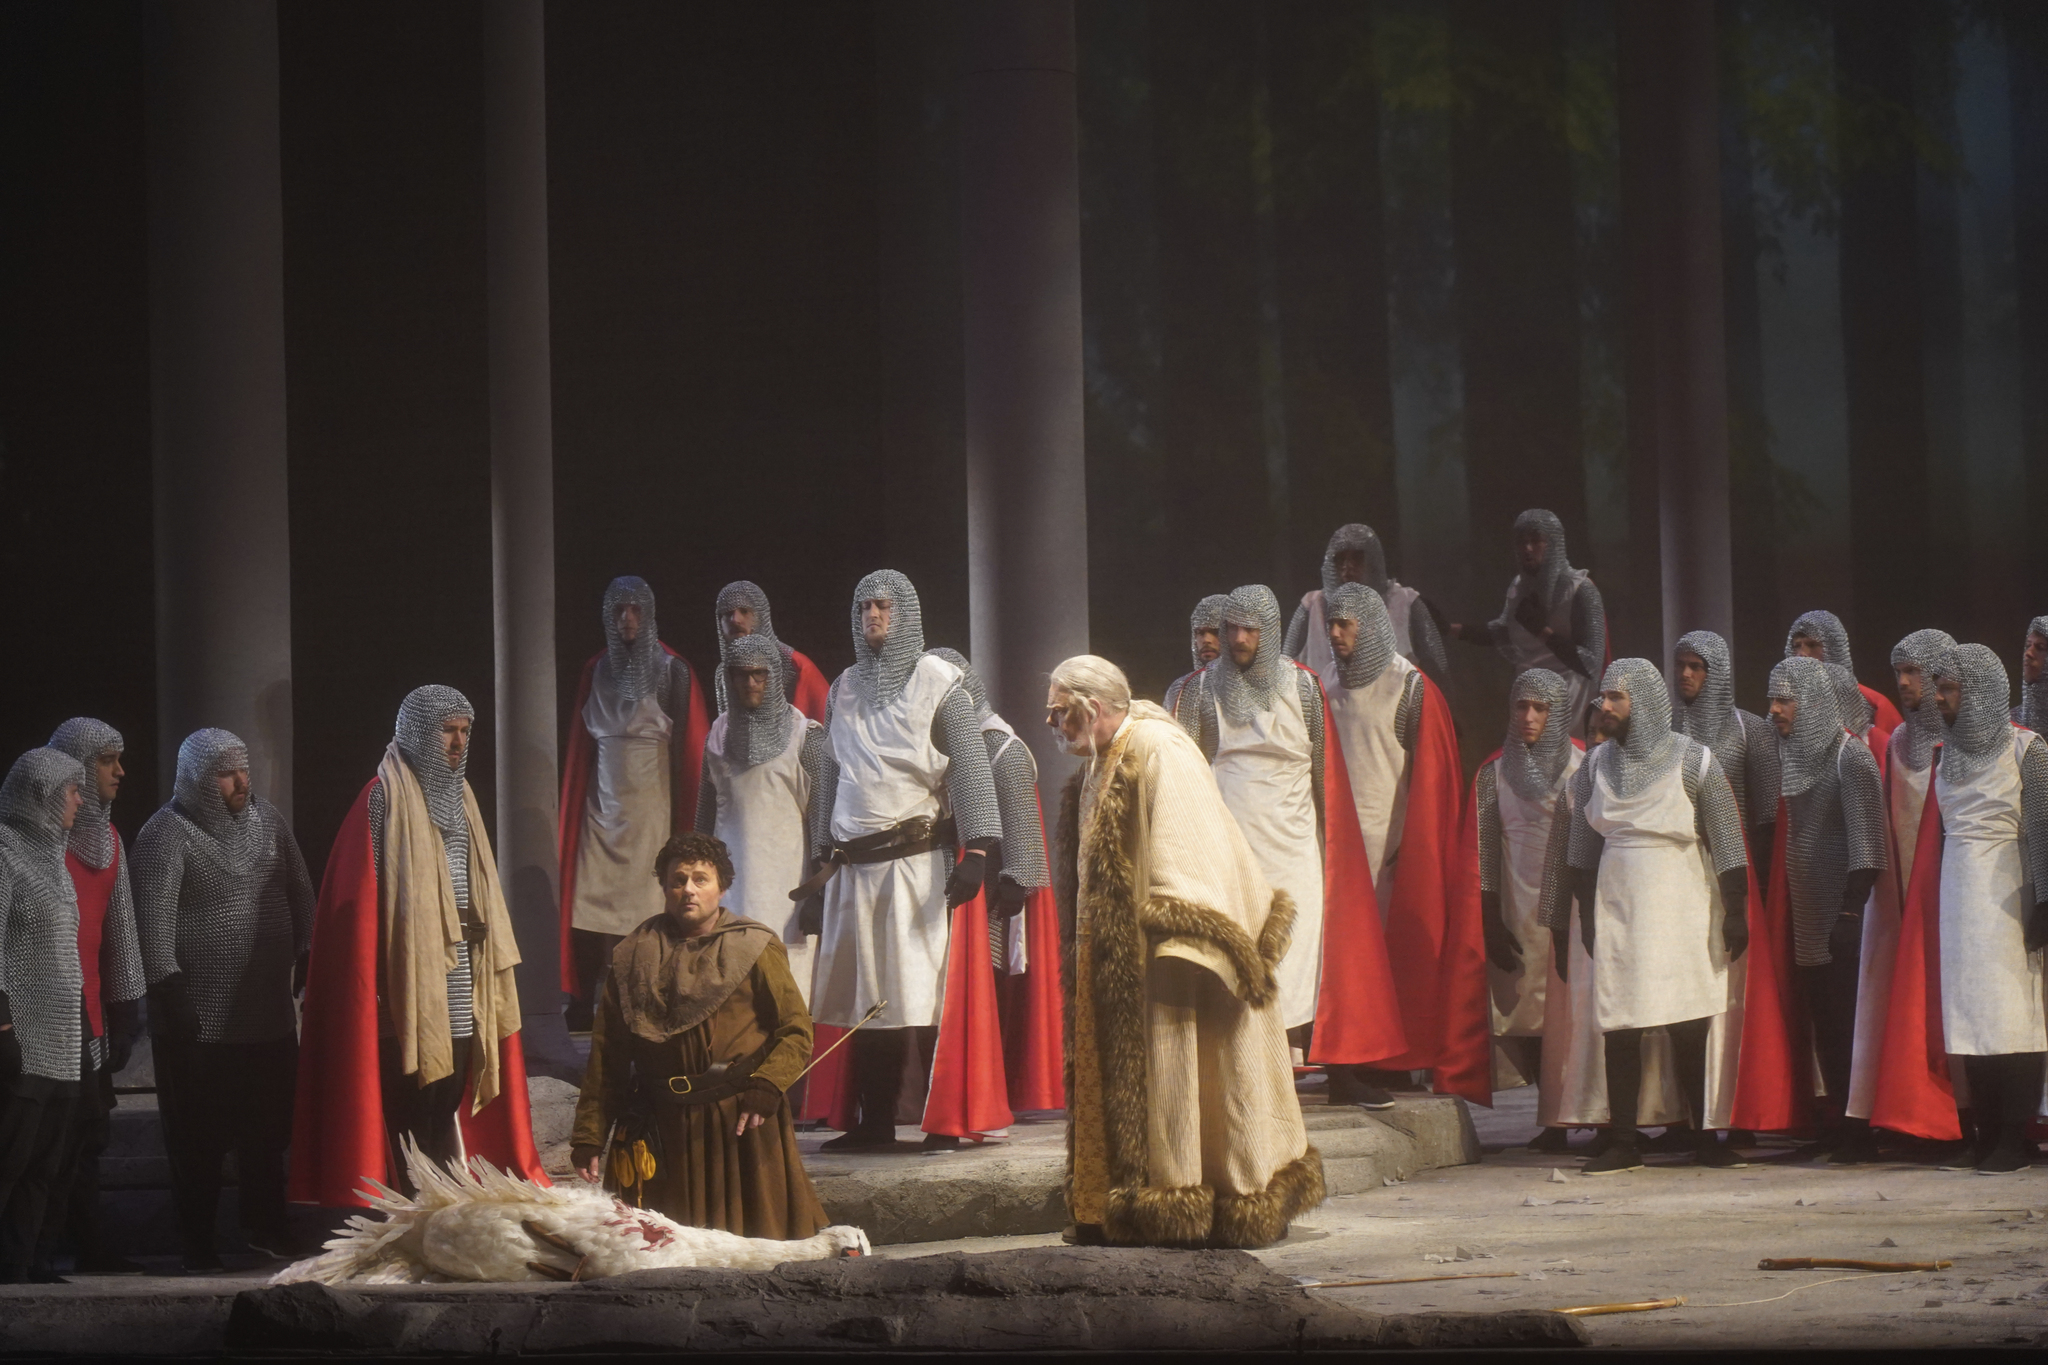 Wagner’s ‘Parsifal’ is a rare and immersive experience